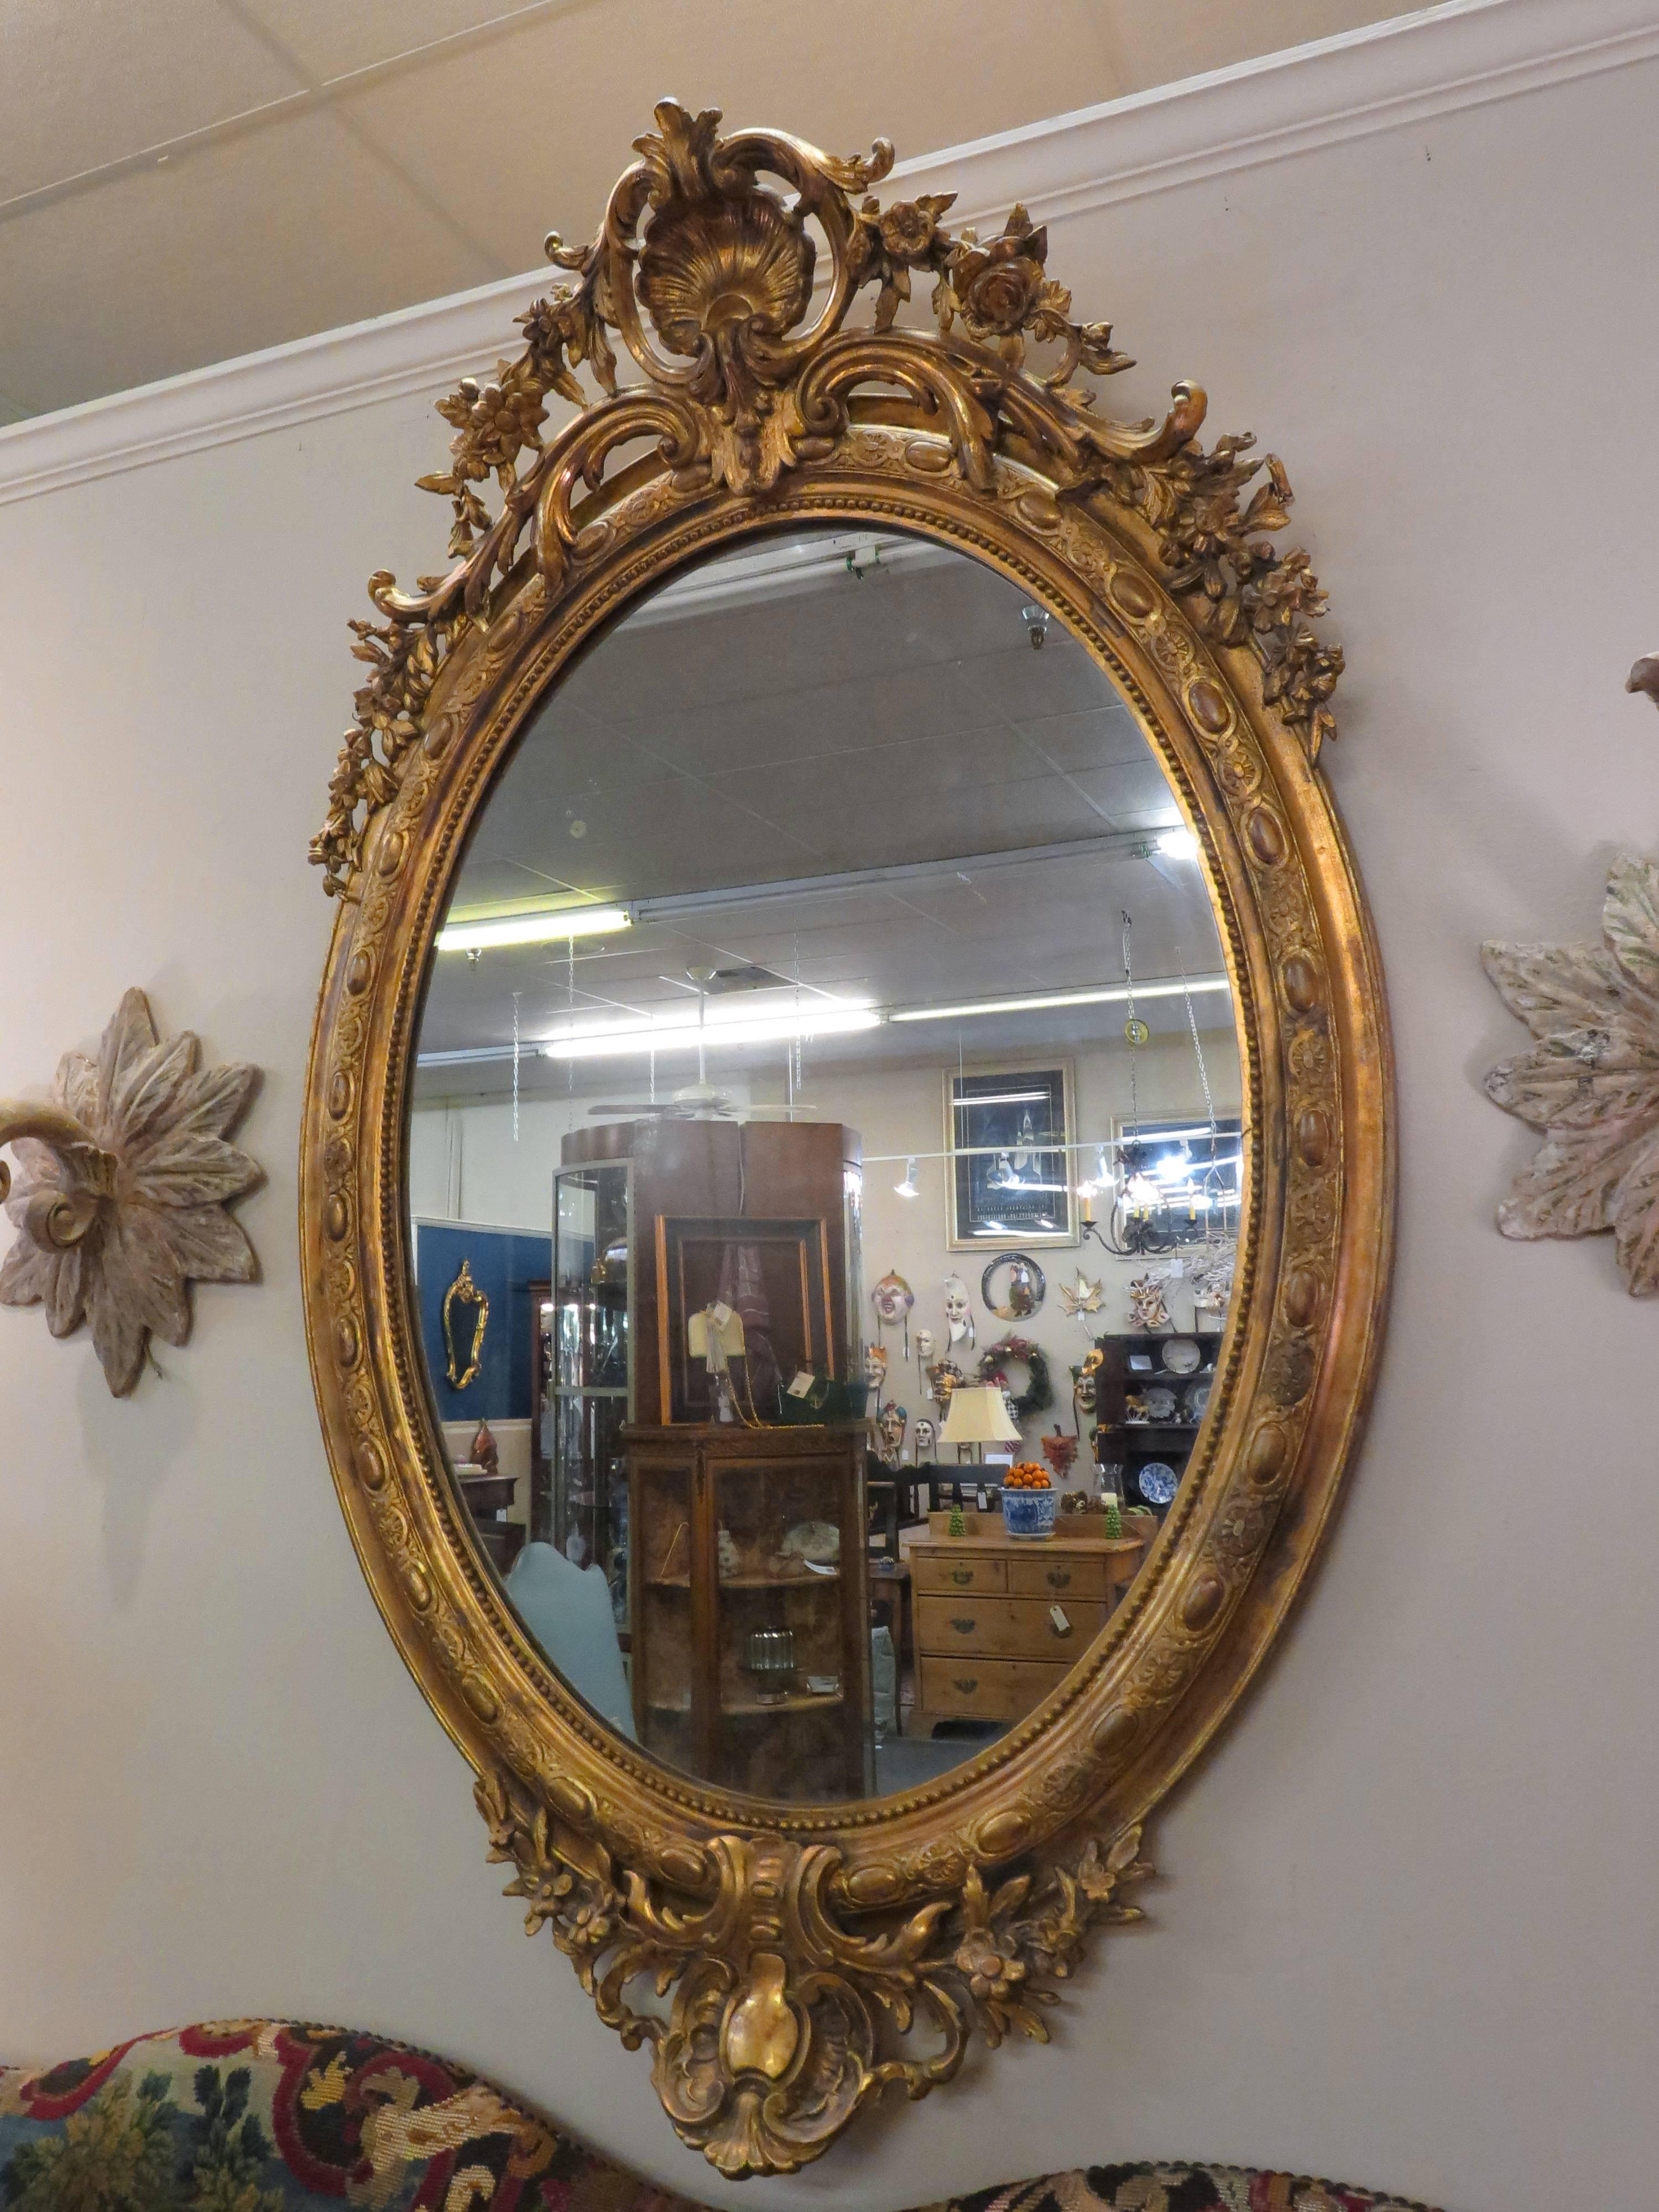 Late 19th century, circa 1870. The mirror has a pierced scrolling crest flanked by floral trailing garlands, with an egg and dart carved border and a further crest and garland carved base.